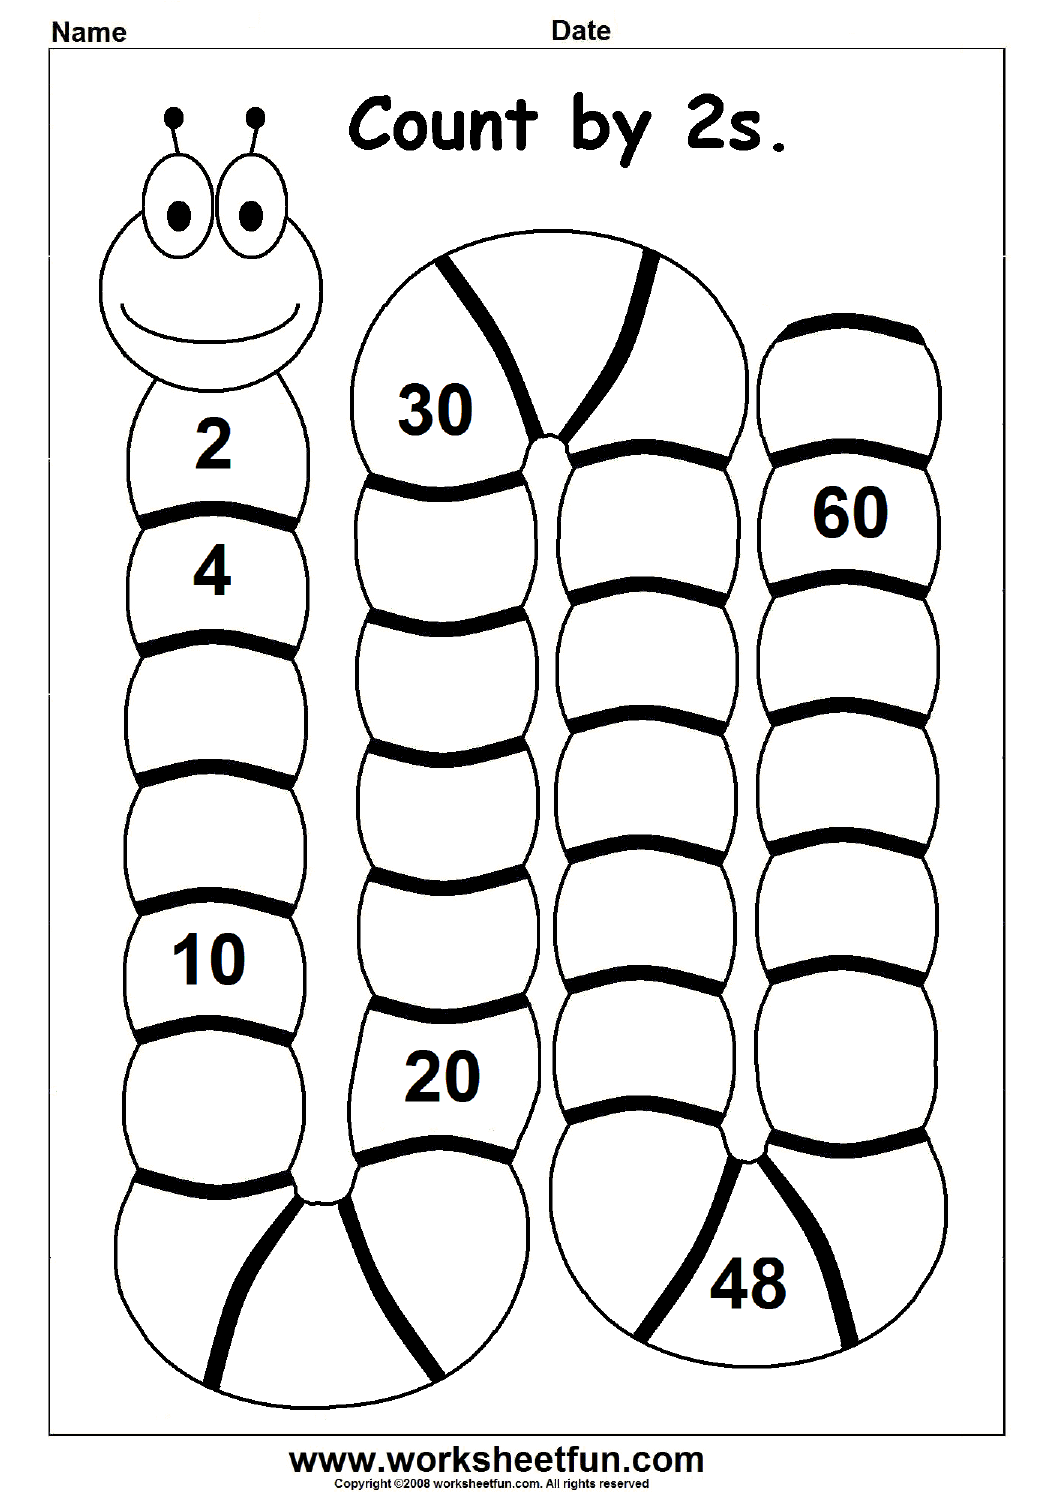 skip-counting-first-grade